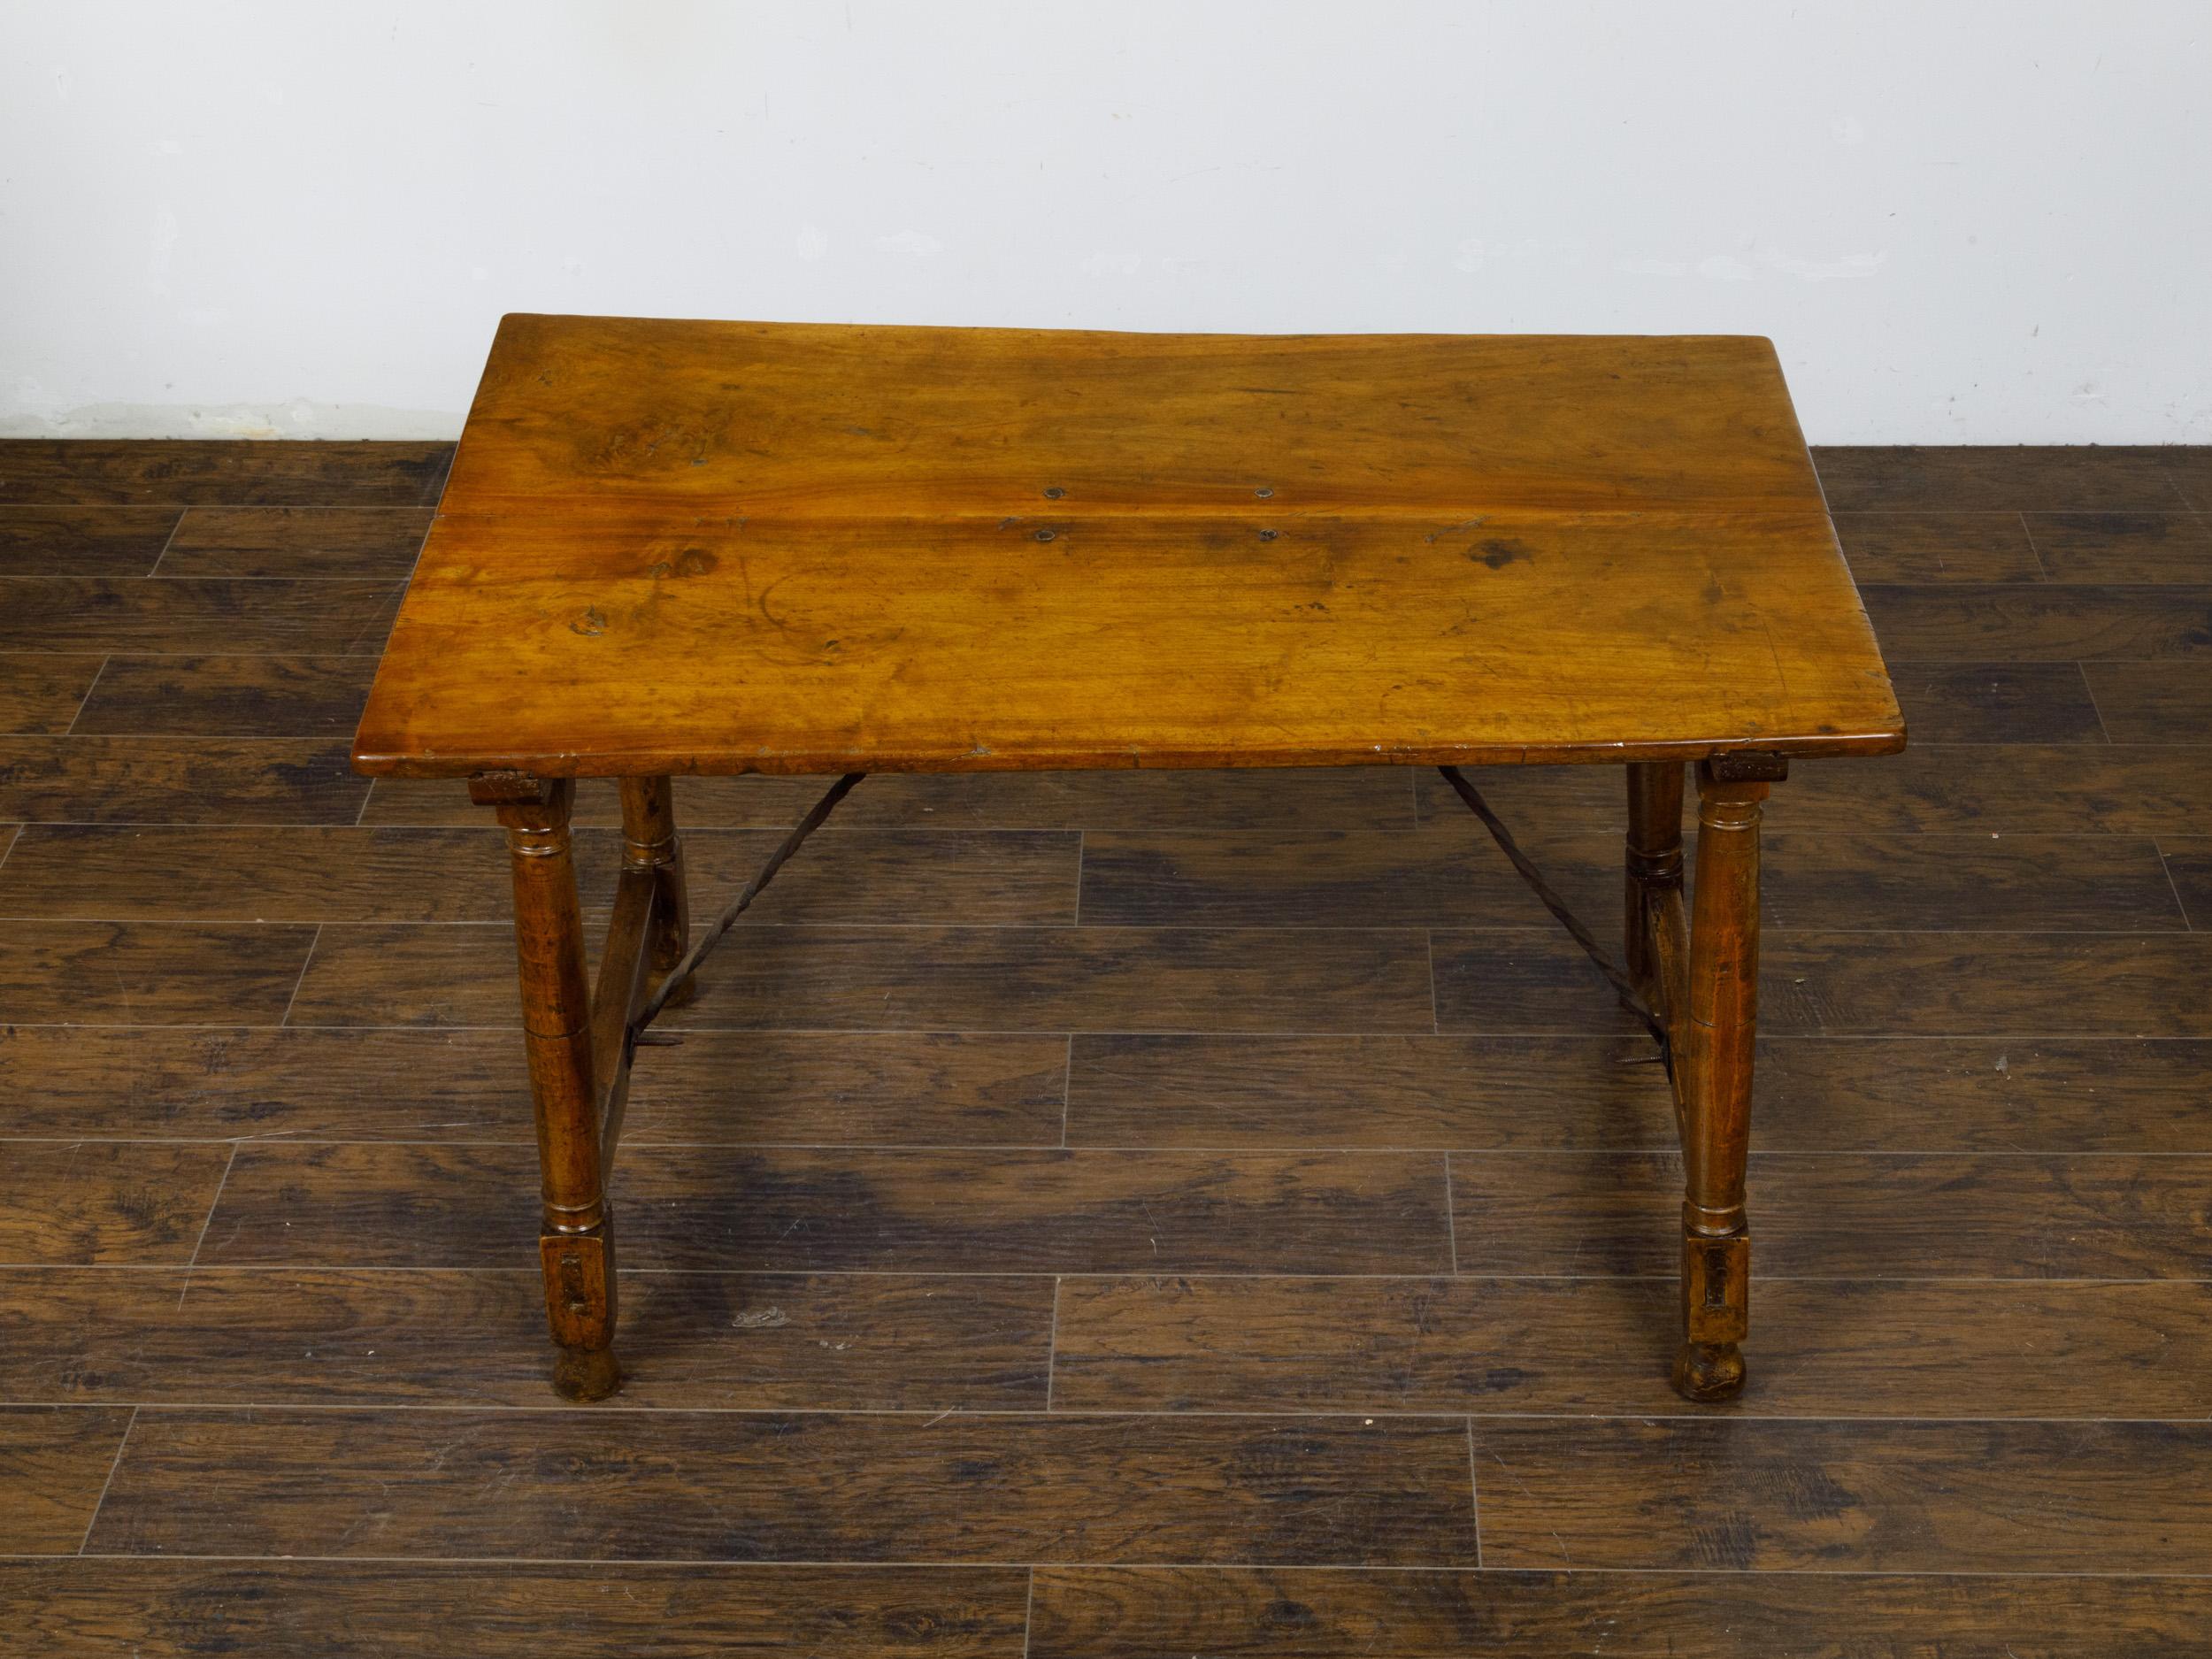 Italian 19th Century Walnut Console Table with Column Legs and Iron Stretchers For Sale 4